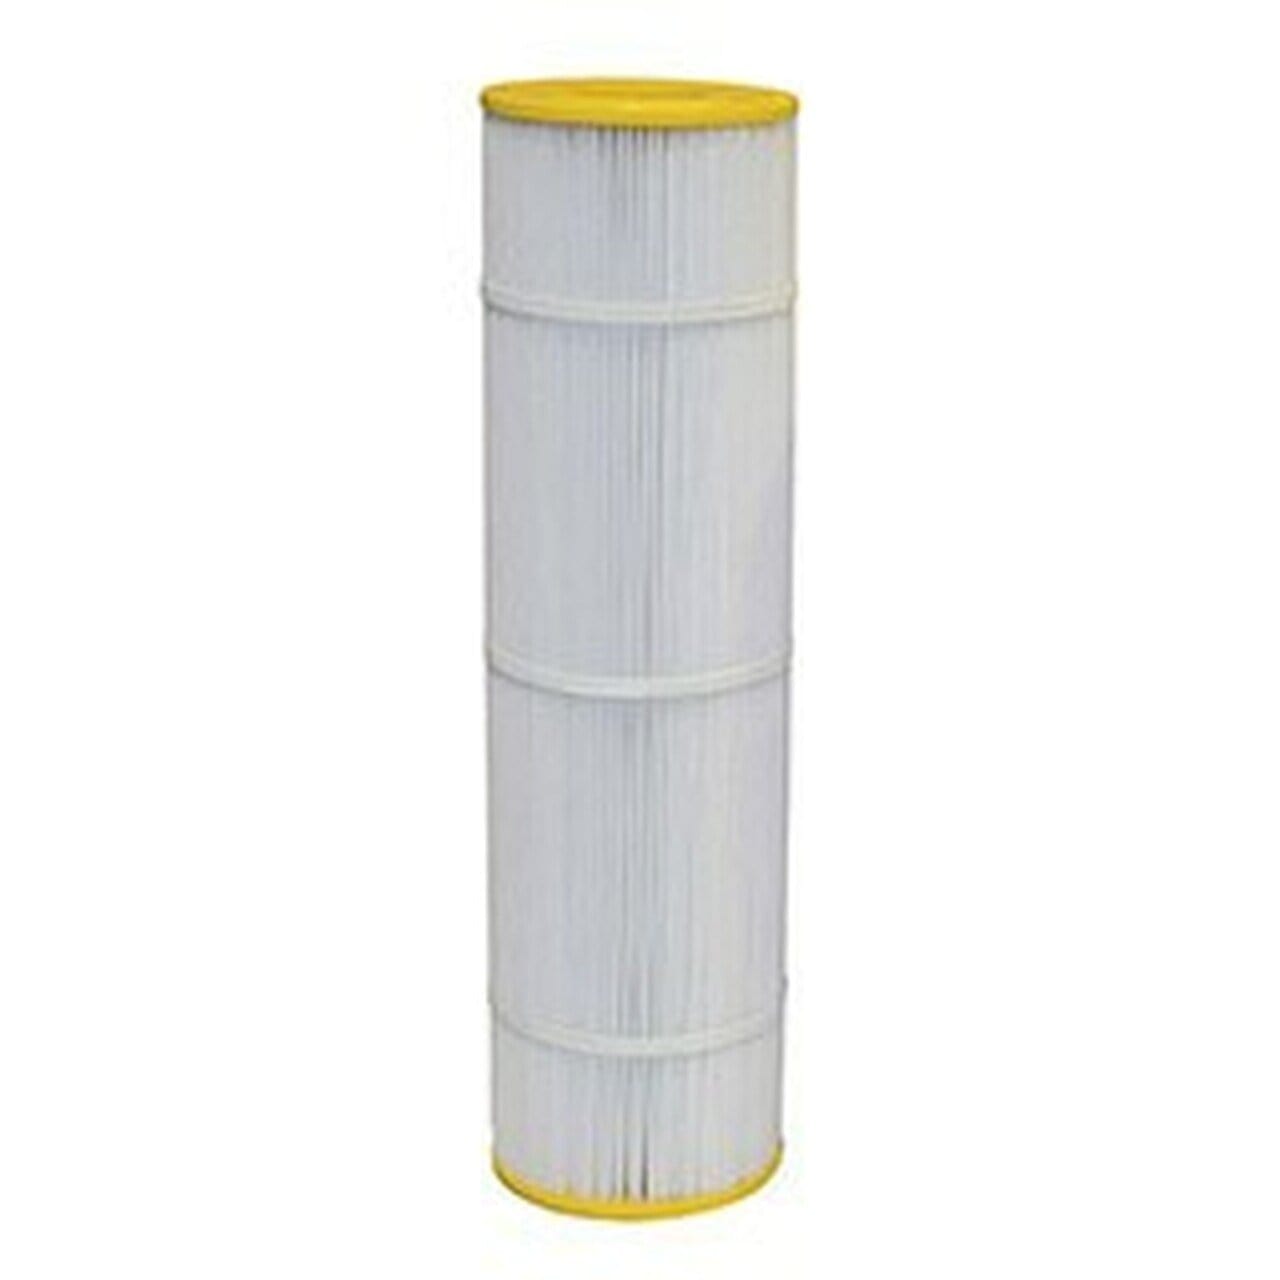 EasyPro Cartridge Filter 120 Sq. Ft. Replacement Element EasyPro Fountain Cartridge Filter EasyPro Fountain Cartridge Filter - Smith Creek Fish Farm